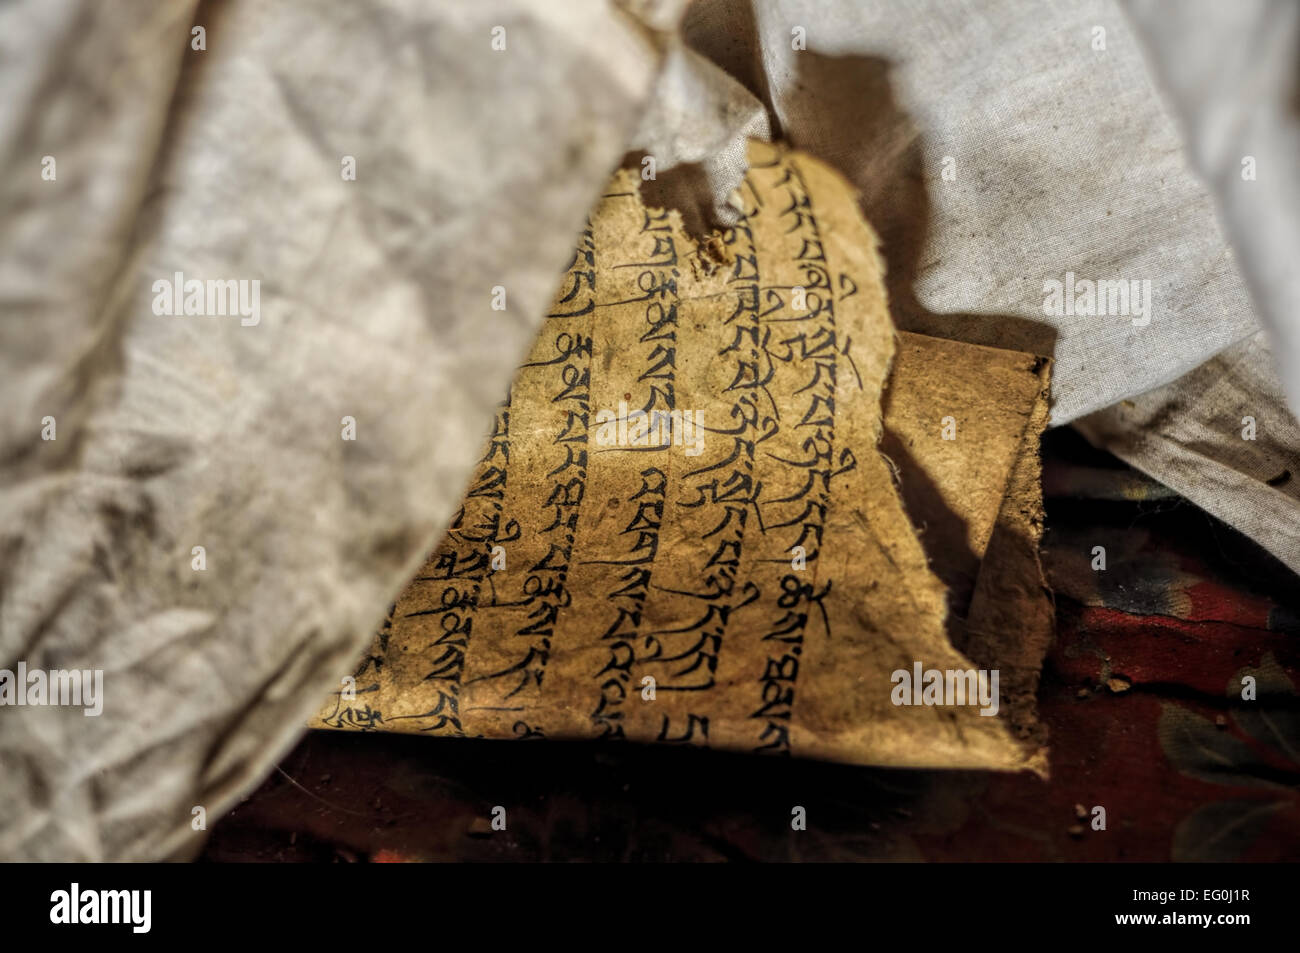 Close-up view of ancient buddhist texts Stock Photo